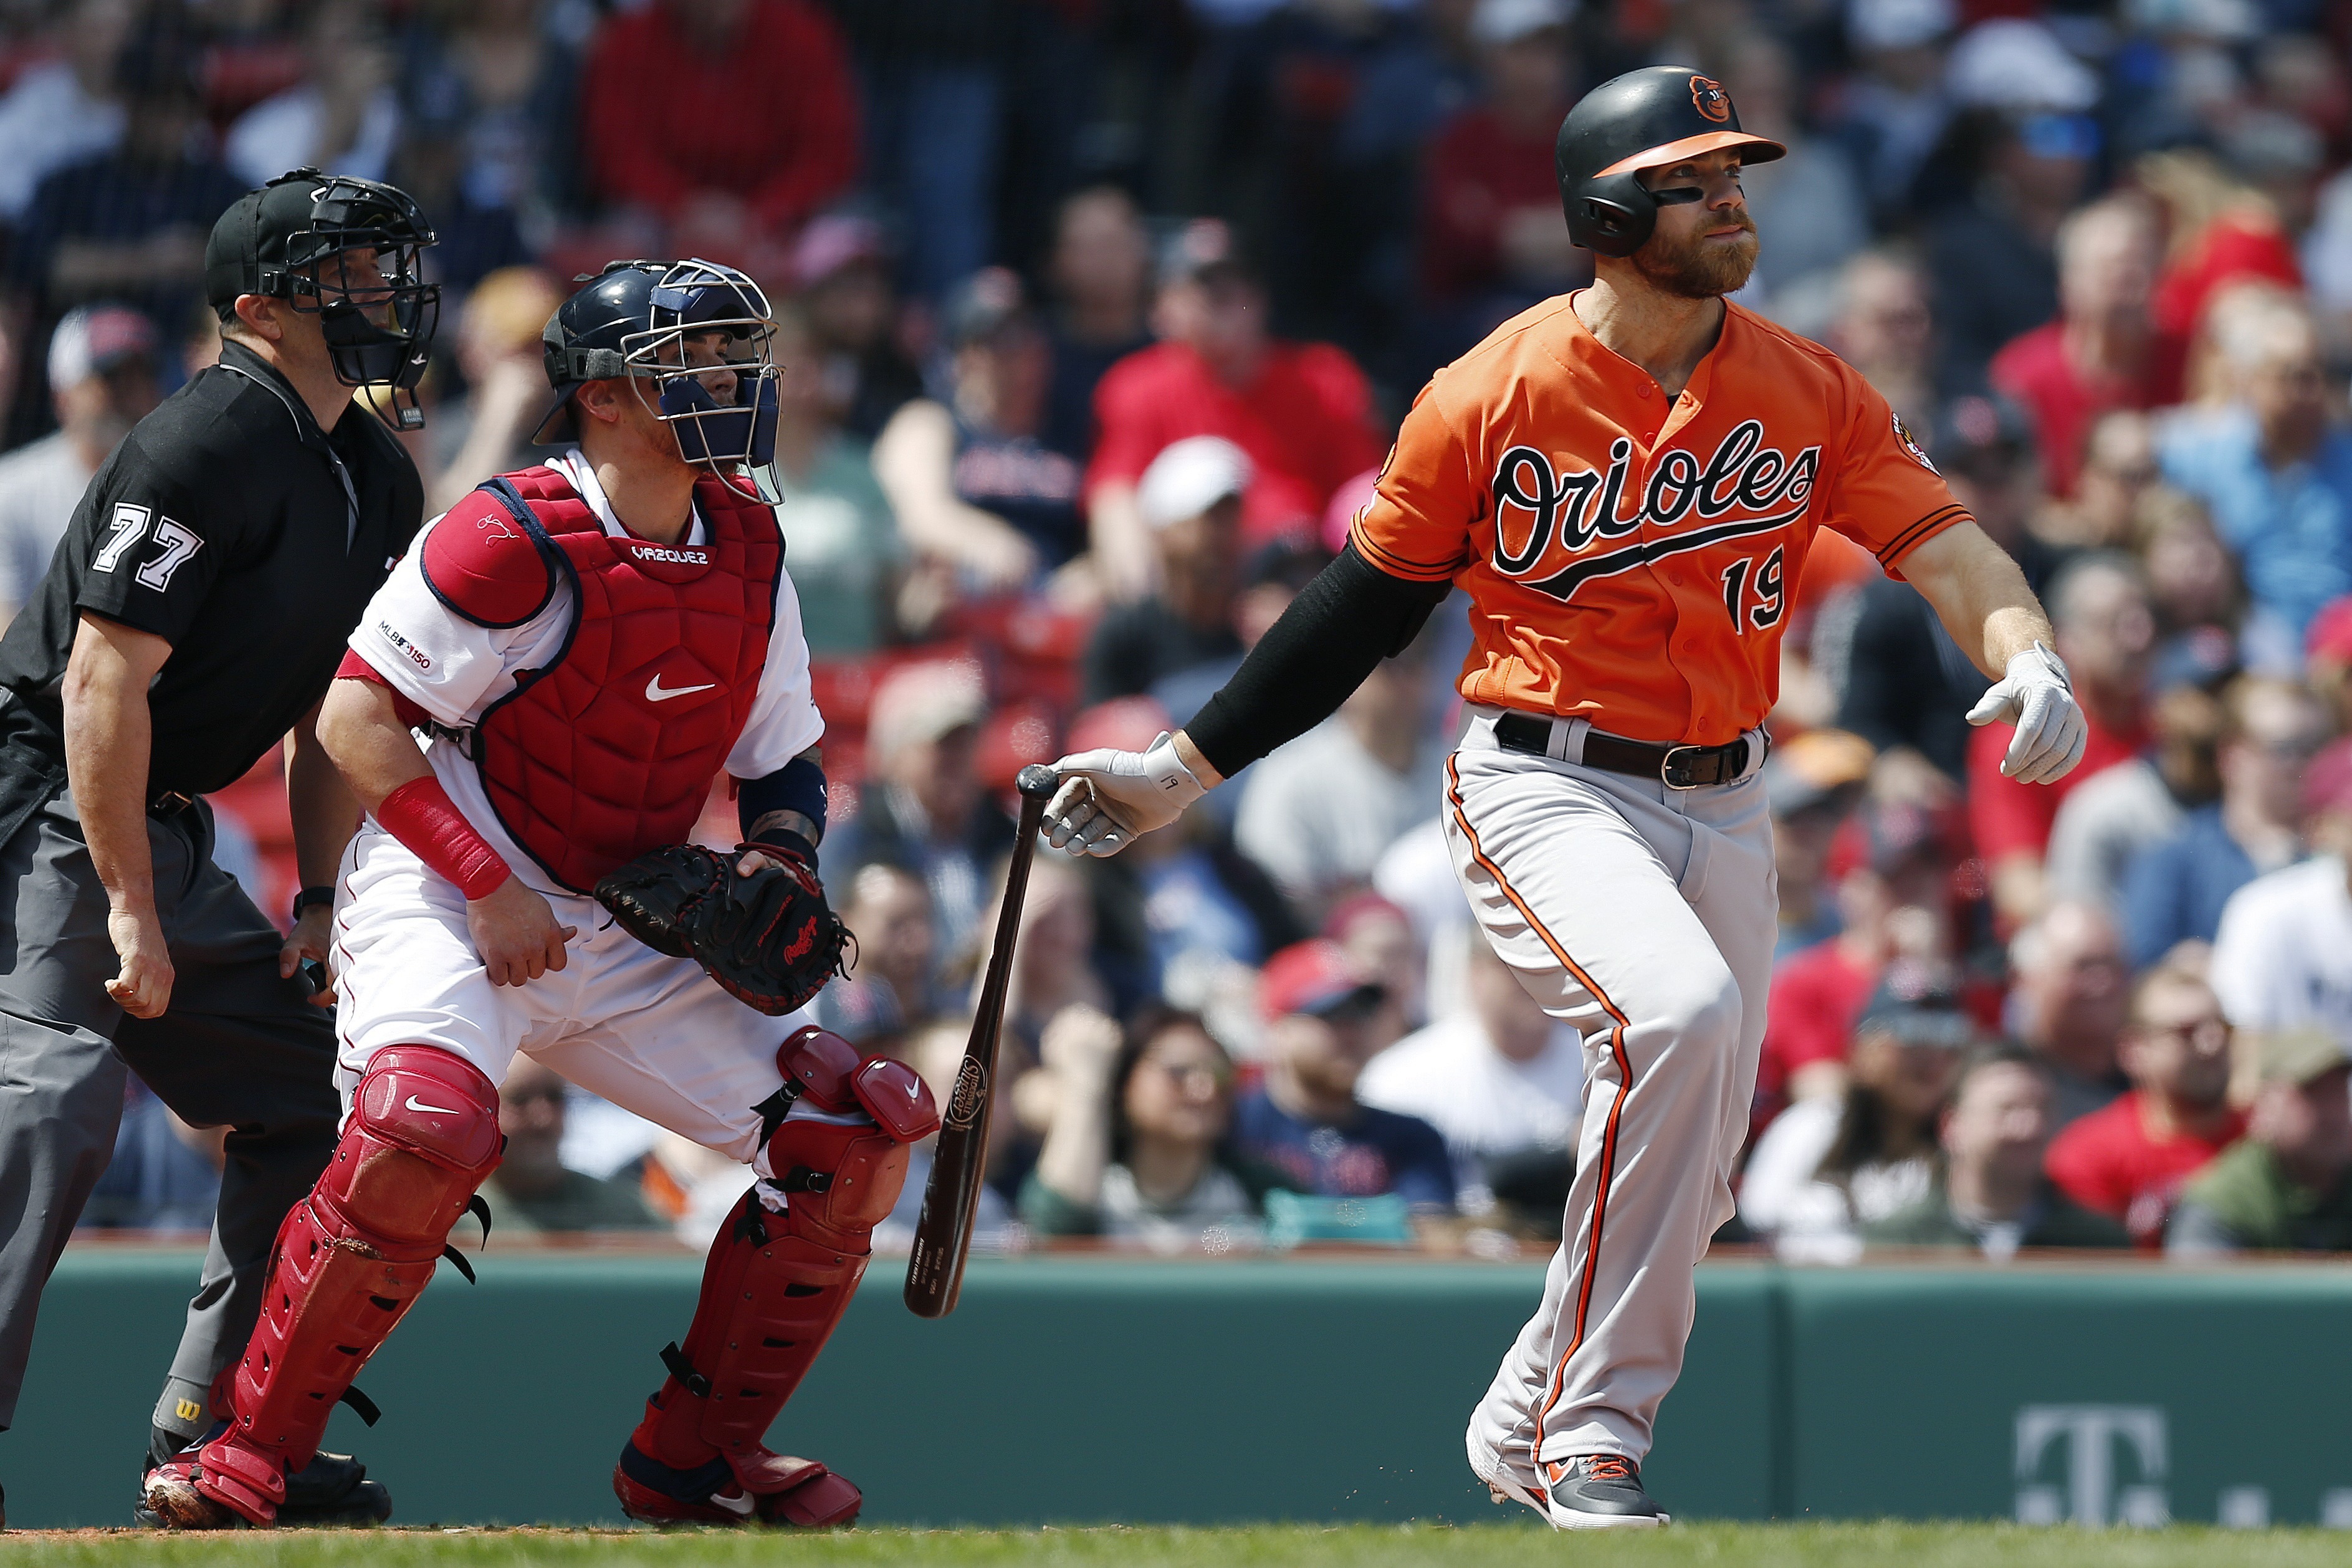 Davis stops record skid at 0 for 54, O’s top Red Sox 9-5